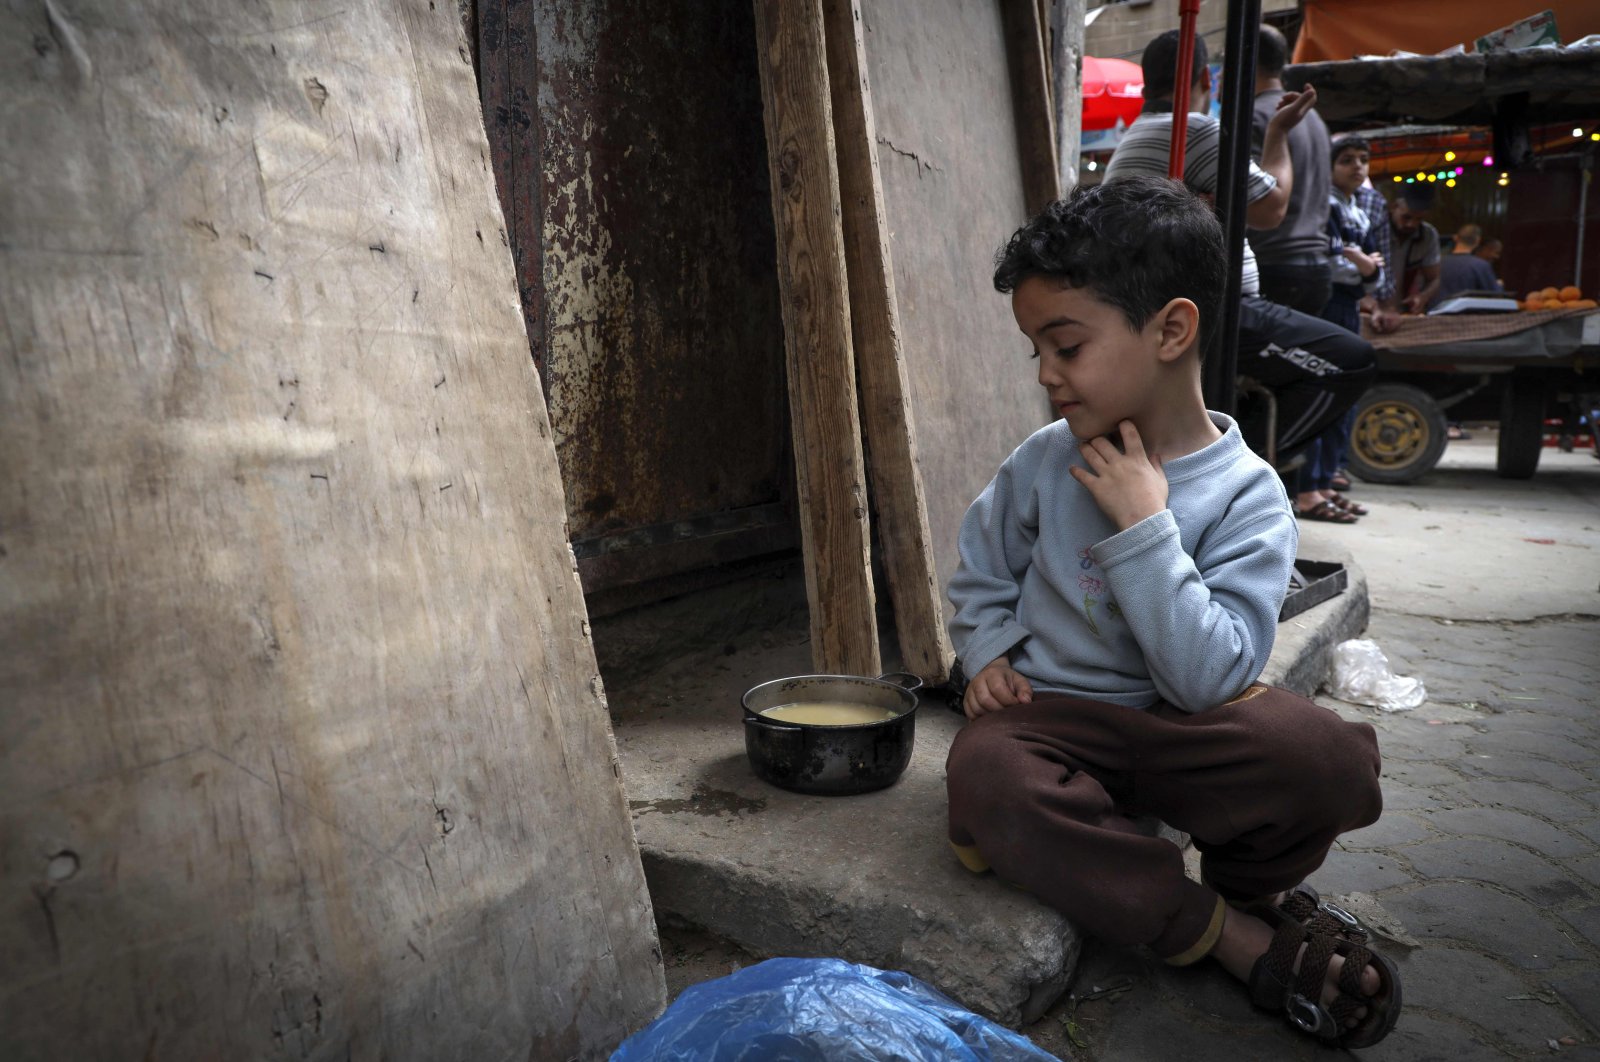 A Palestinian boy looks at his portion of soup, given out to poor families during the holy month of Ramadan, Gaza City, Palestine, April 24, 2020. (AFP Photo)